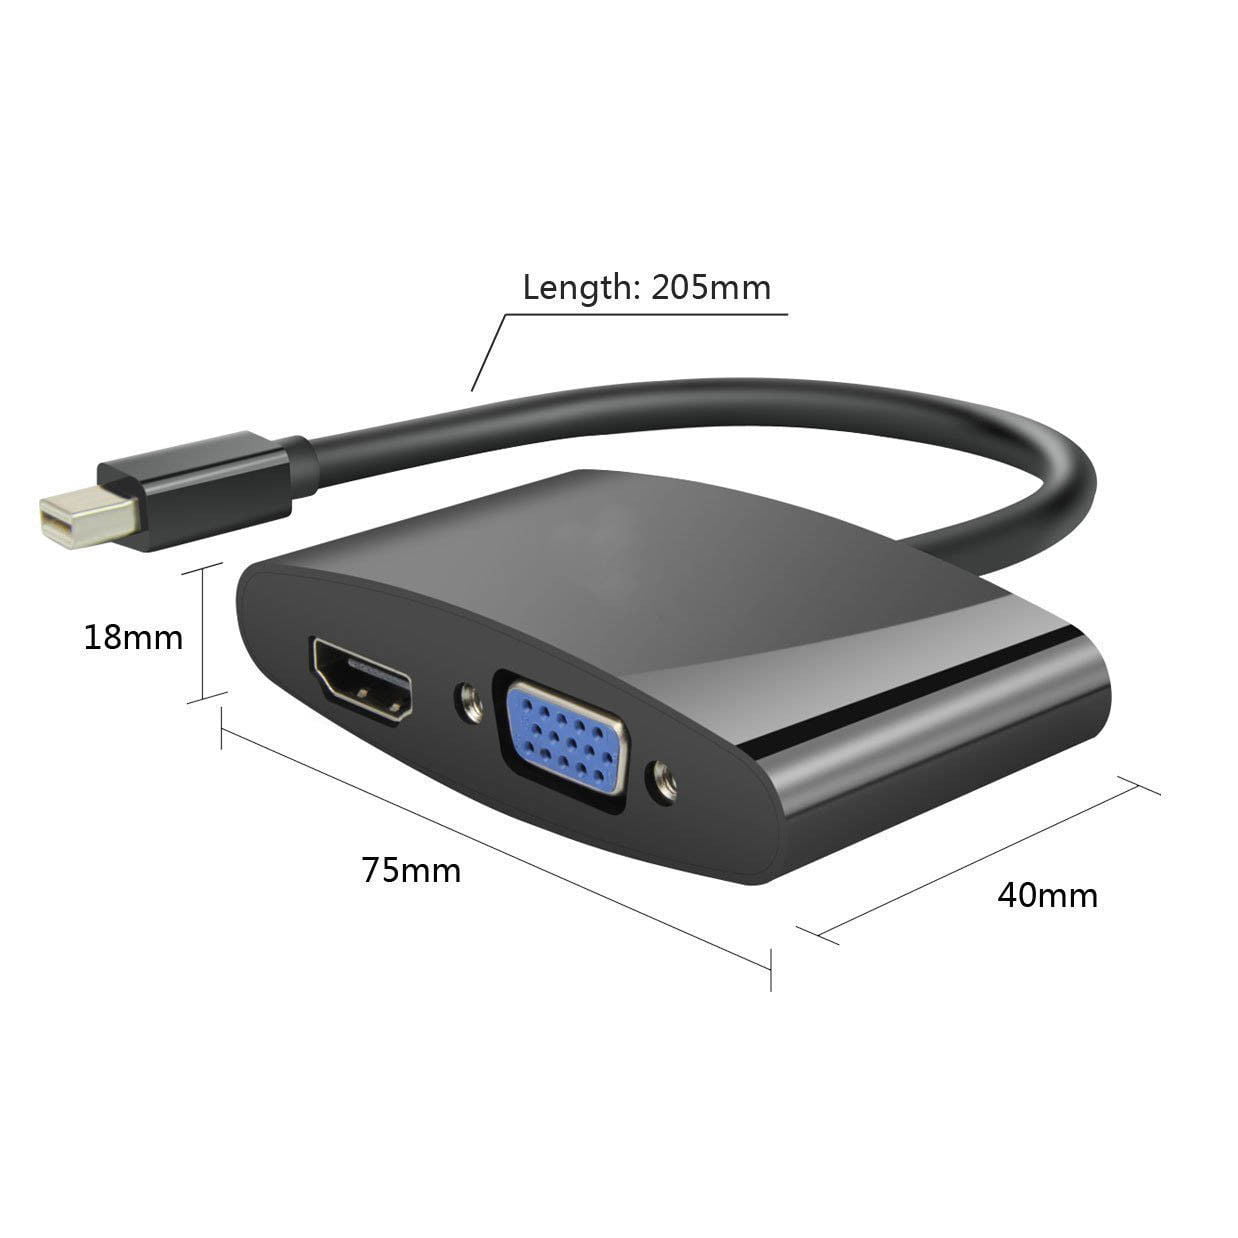 hdmi connector for mac